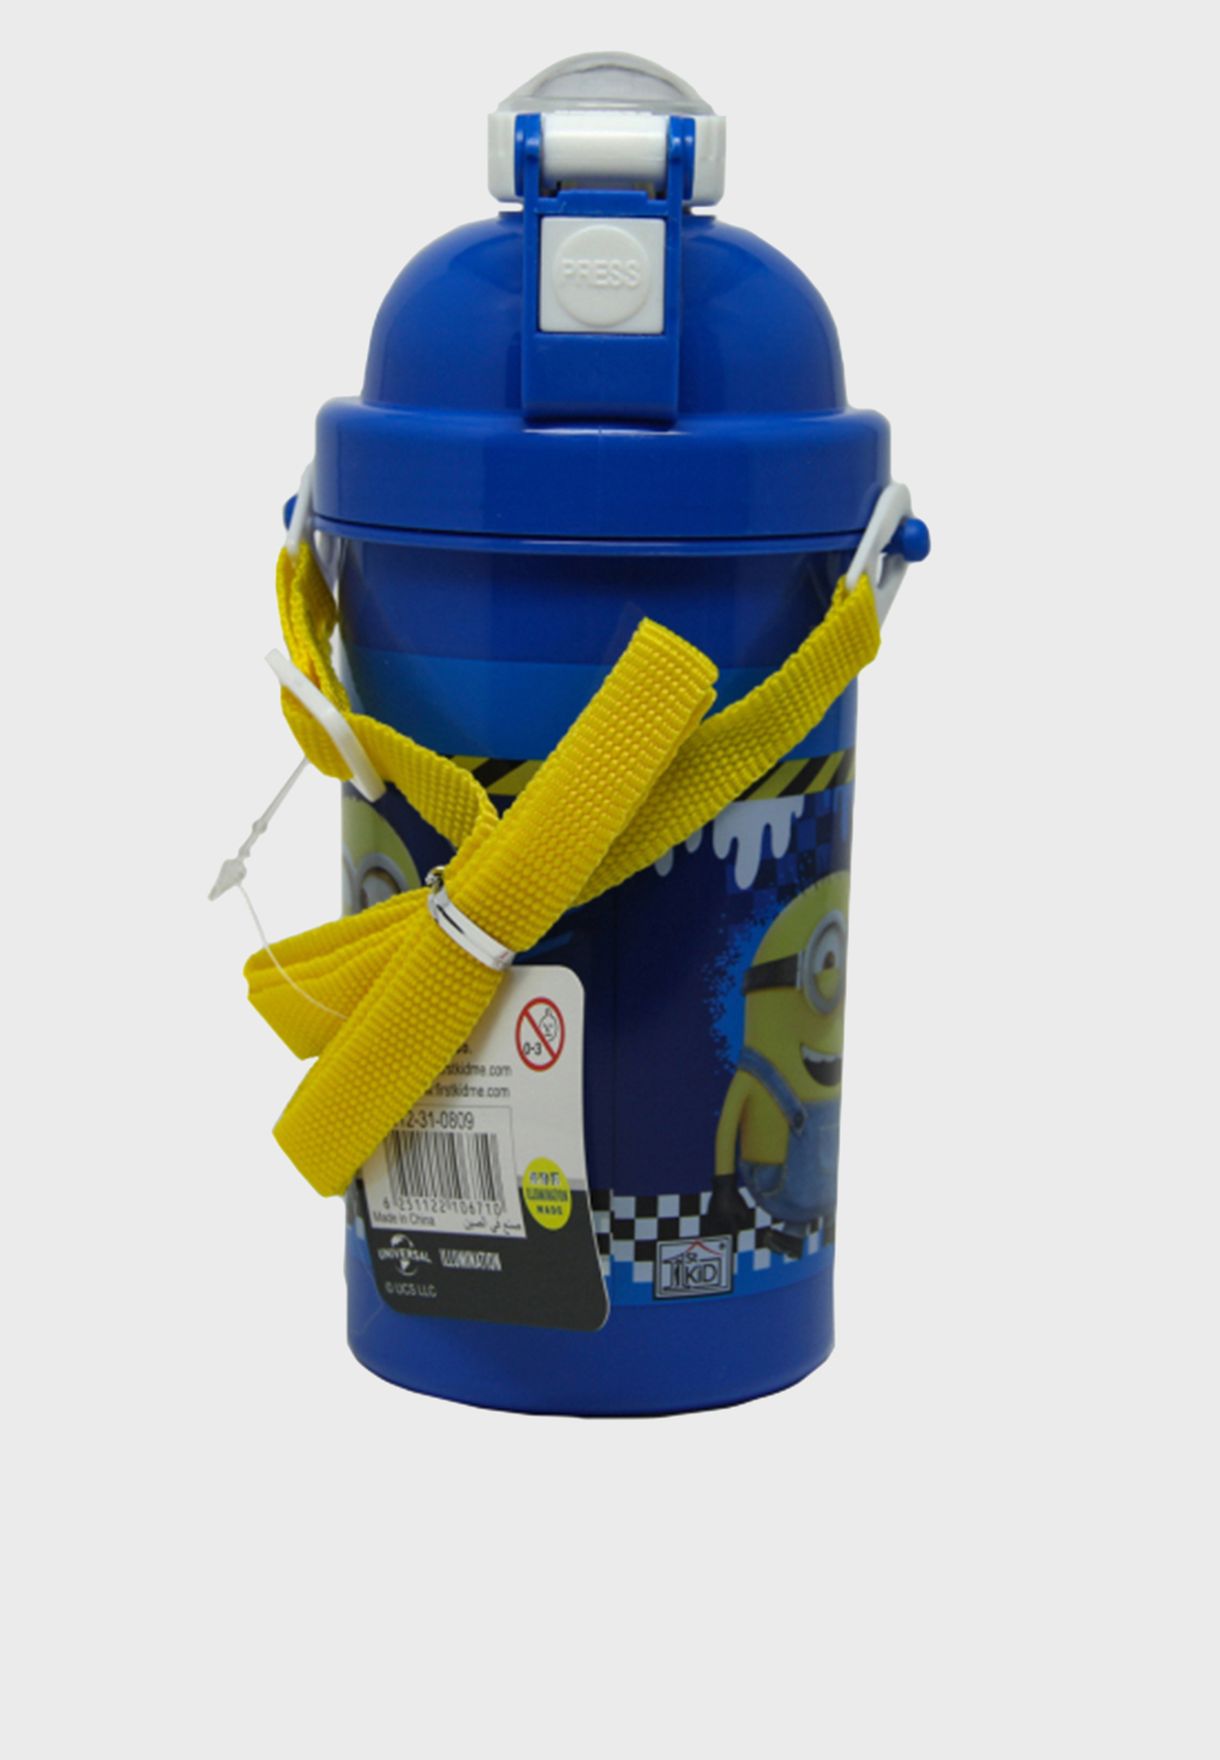 Minions: The Rise Of Gru Waterbottle